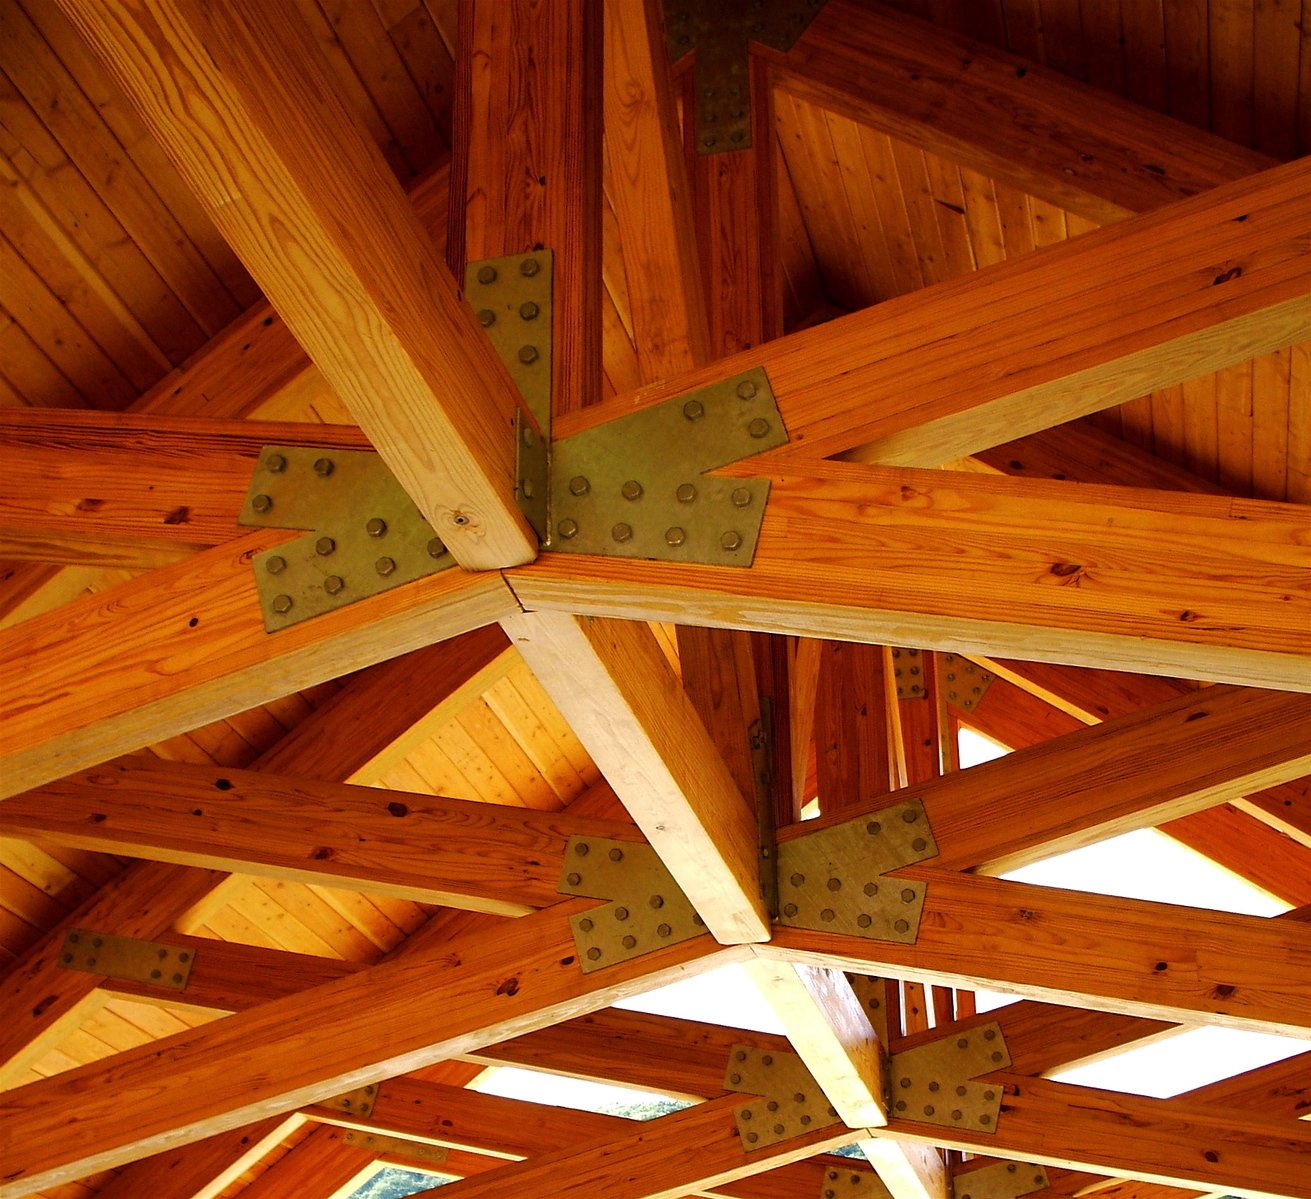 A network of wooden beams in a roof 